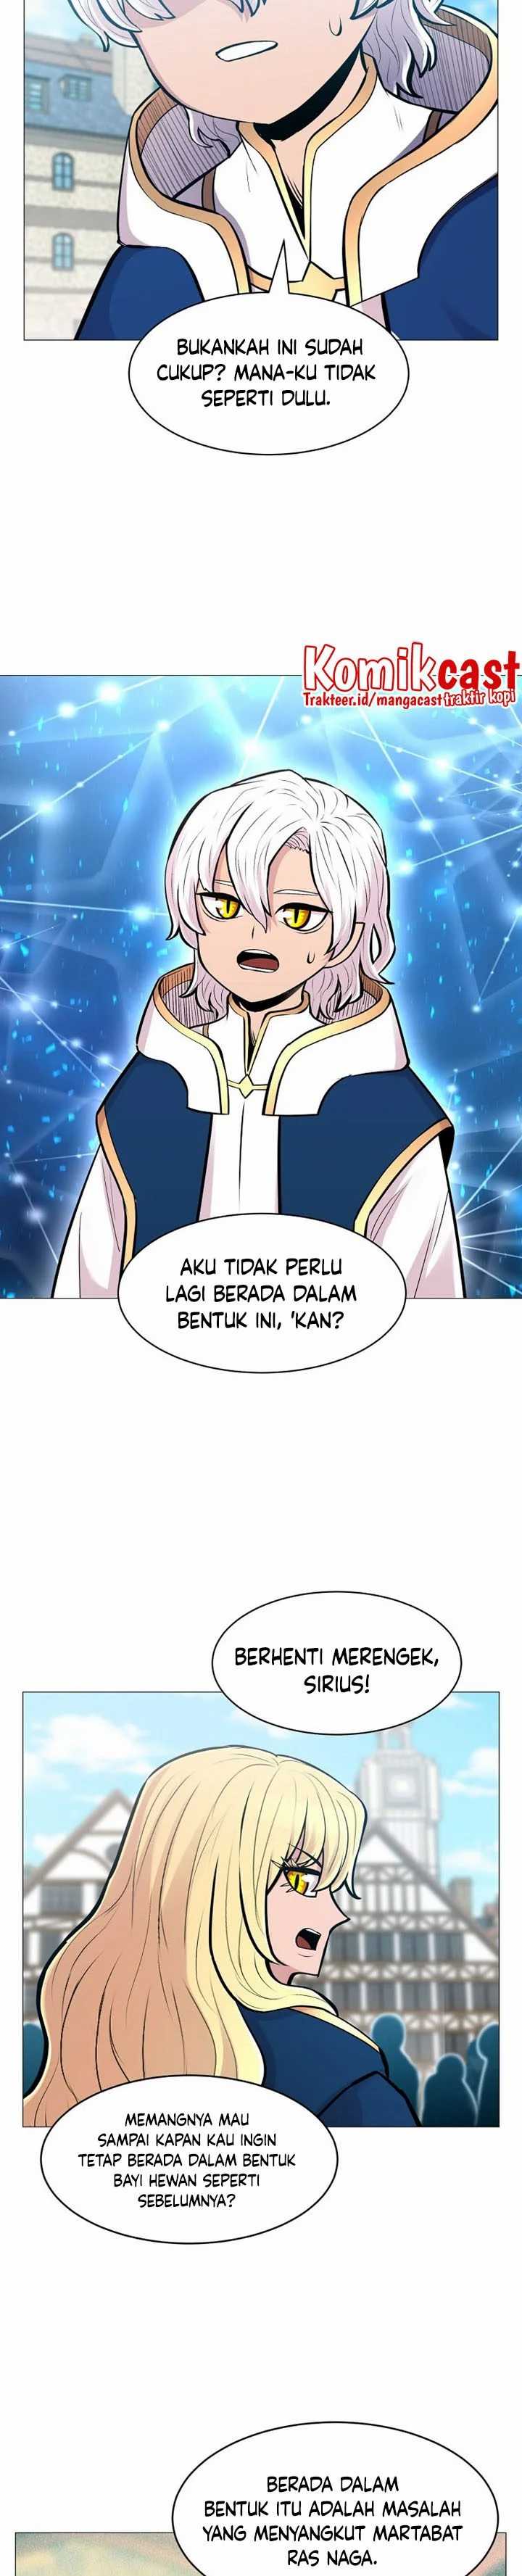 Updater Chapter 85